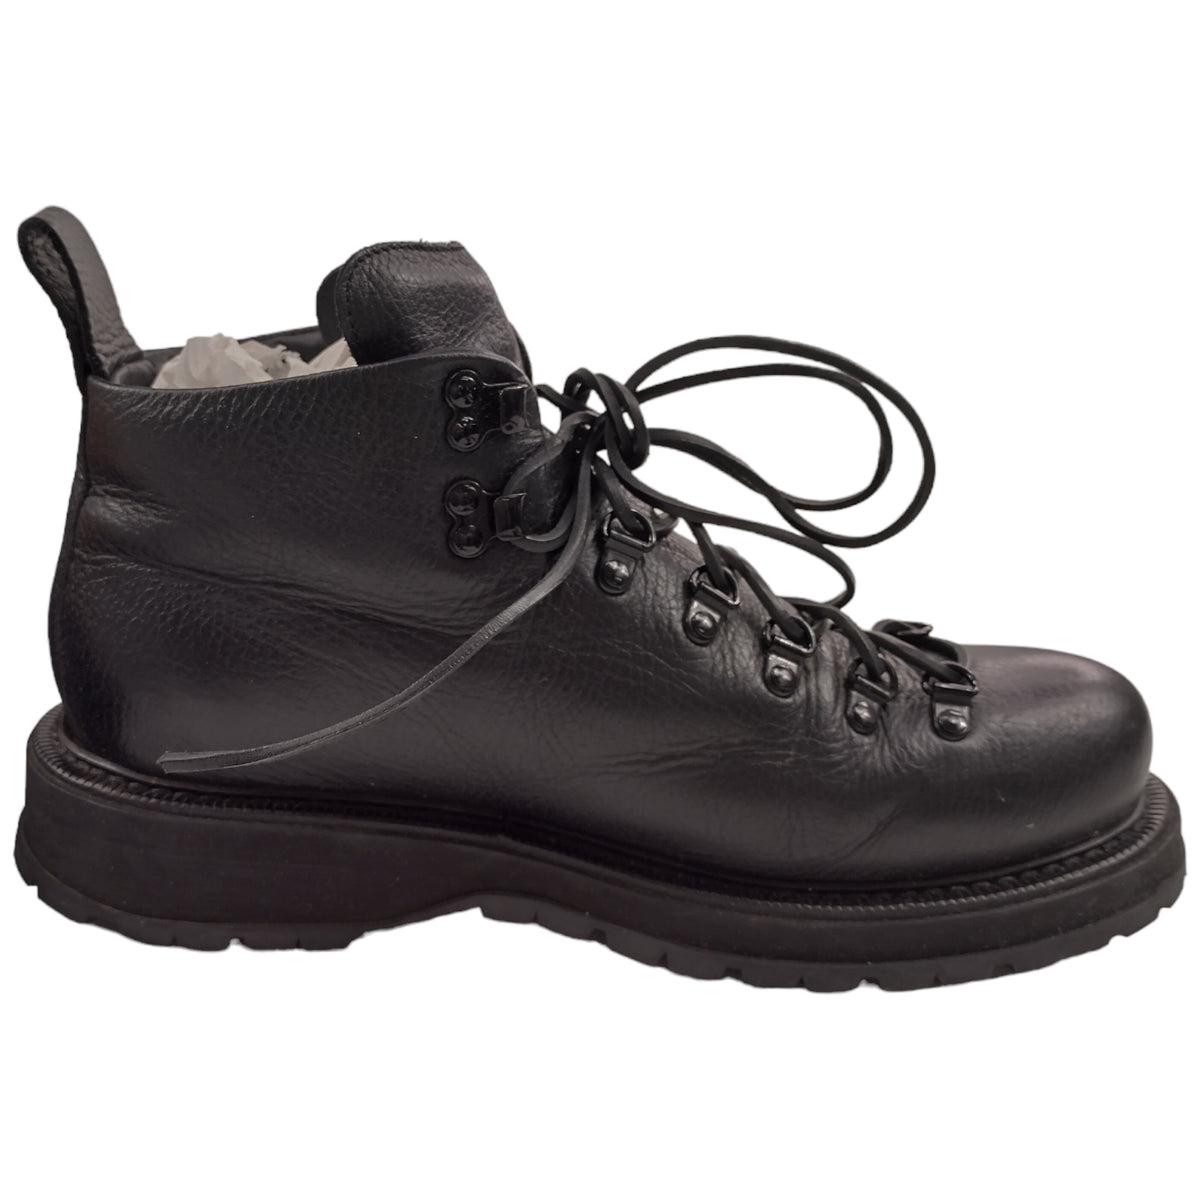 Peter Storm Black Buttero Zeno Leather Hiking Boot